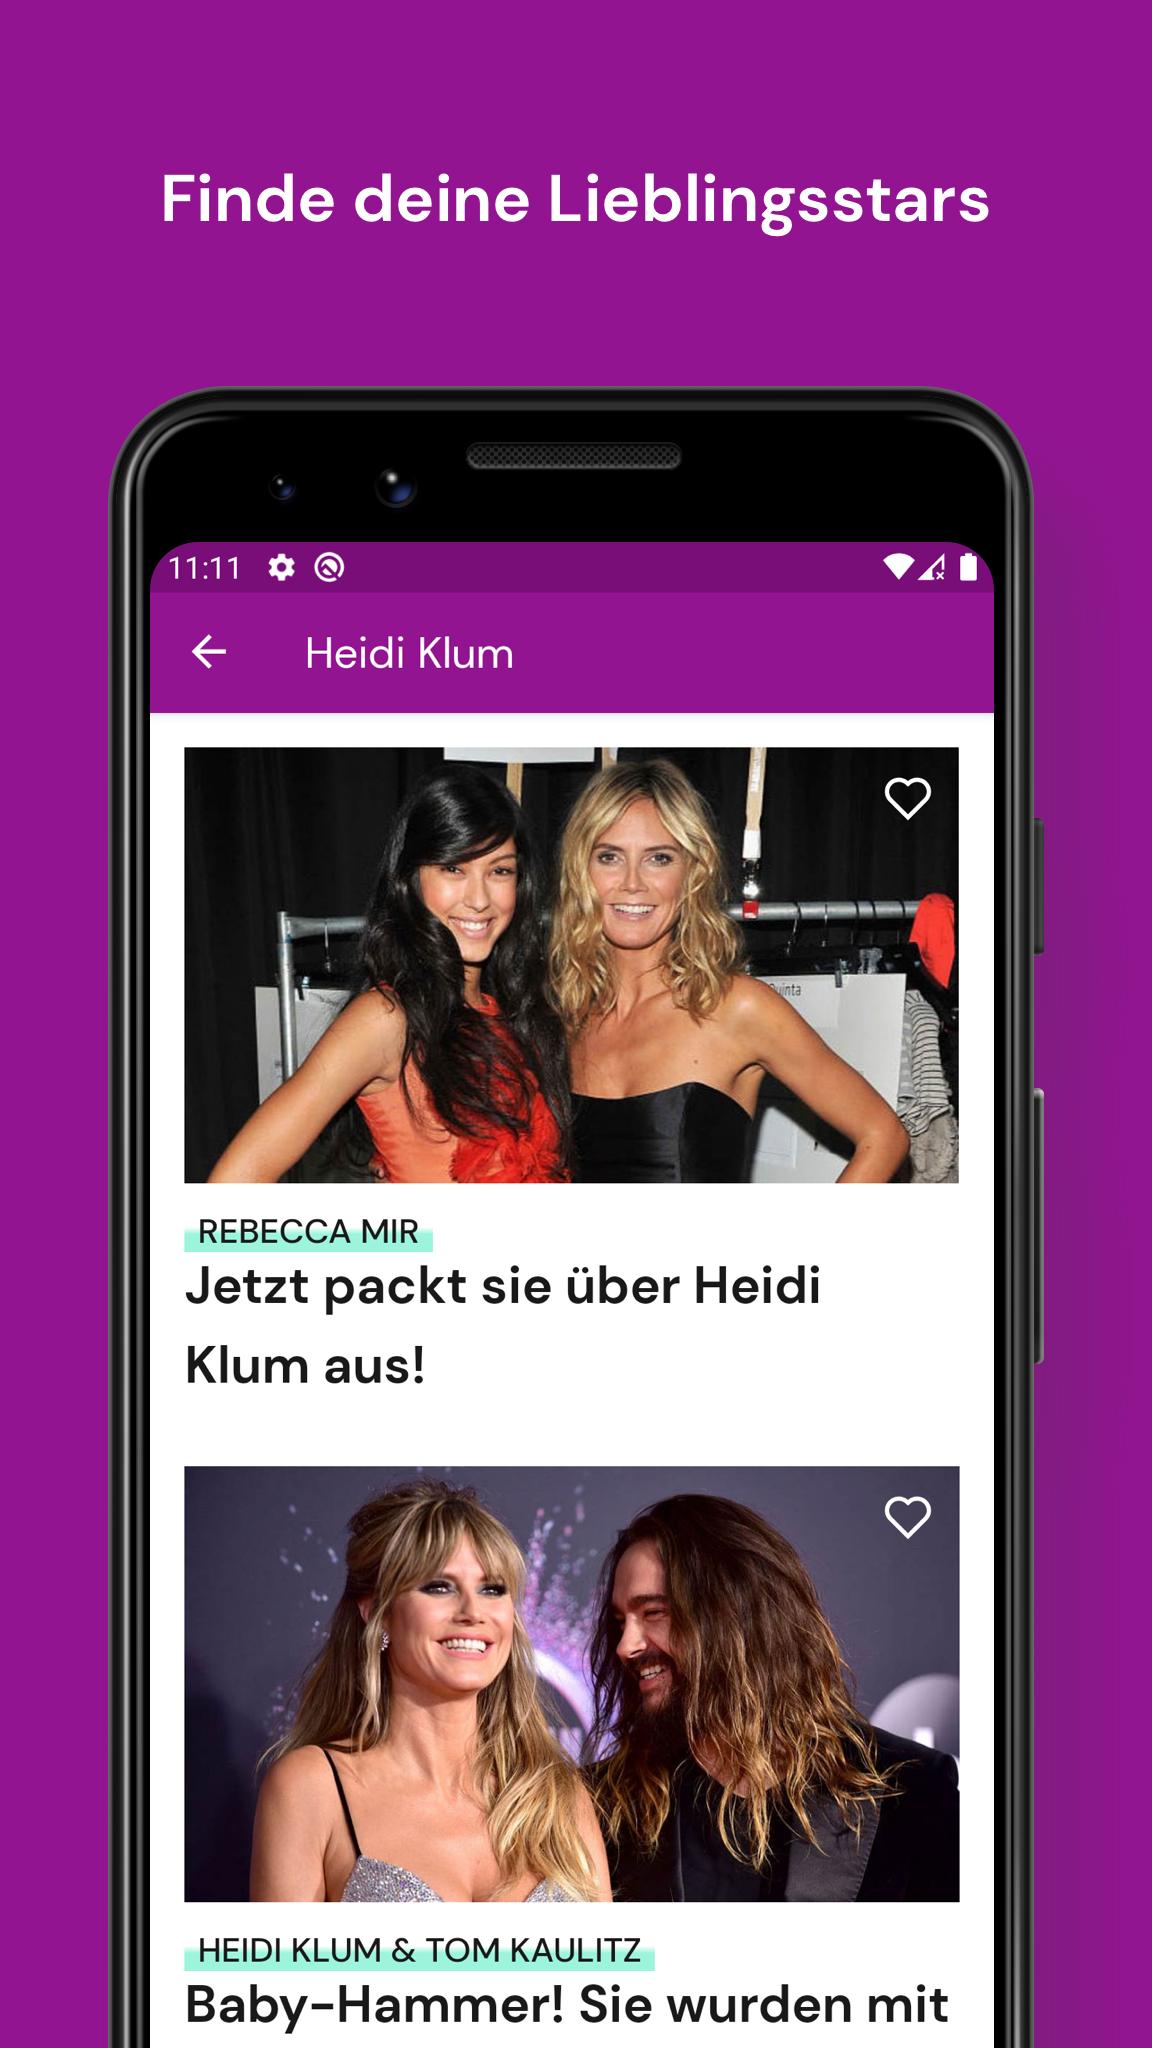 Android application InTouch - Promi-News für Dich! screenshort